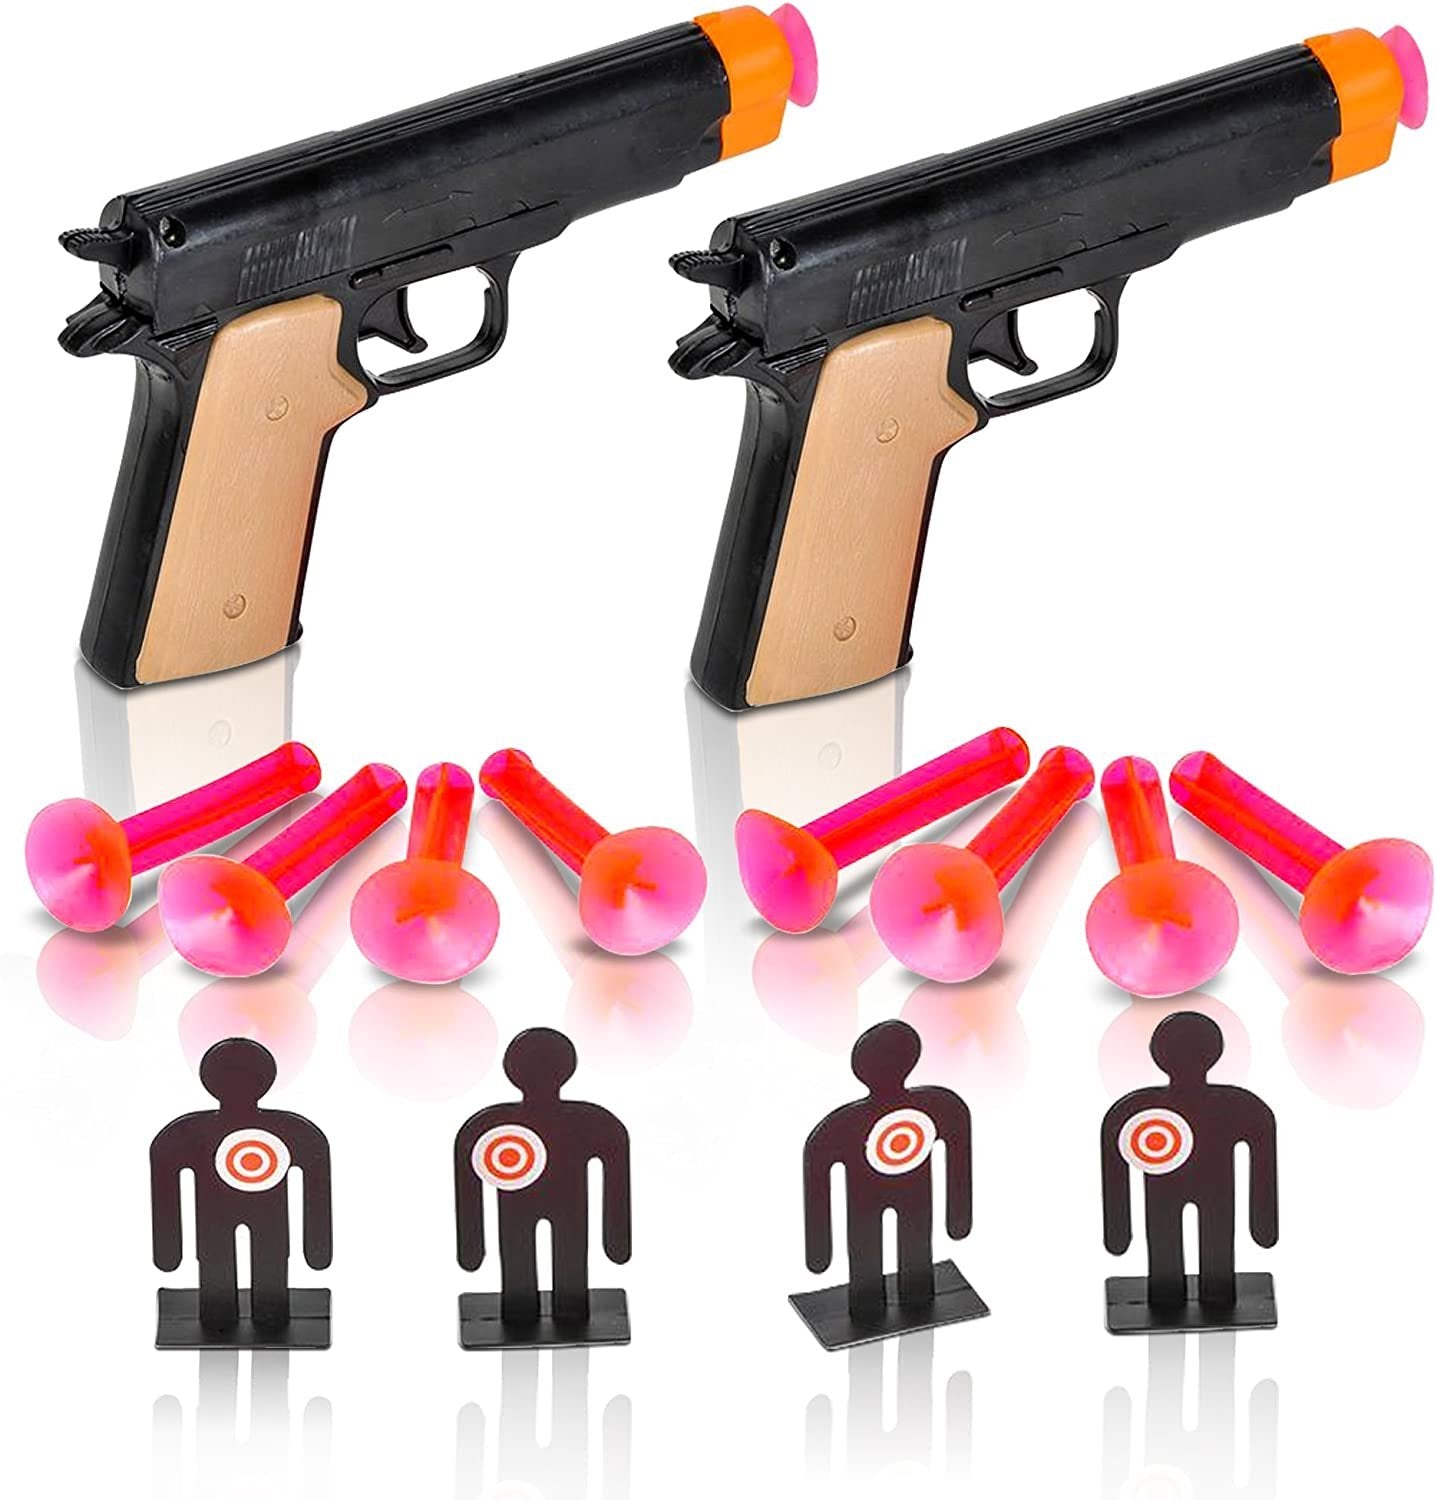 Aim The Police Pistol Dart Gun Set, Includes 2 Toy Pistols, 8 Suction Cup Darts, 4 Targets and 1 Instruction Sheet, Fun Target Shooting Game for Kids and Adults, Great Gift